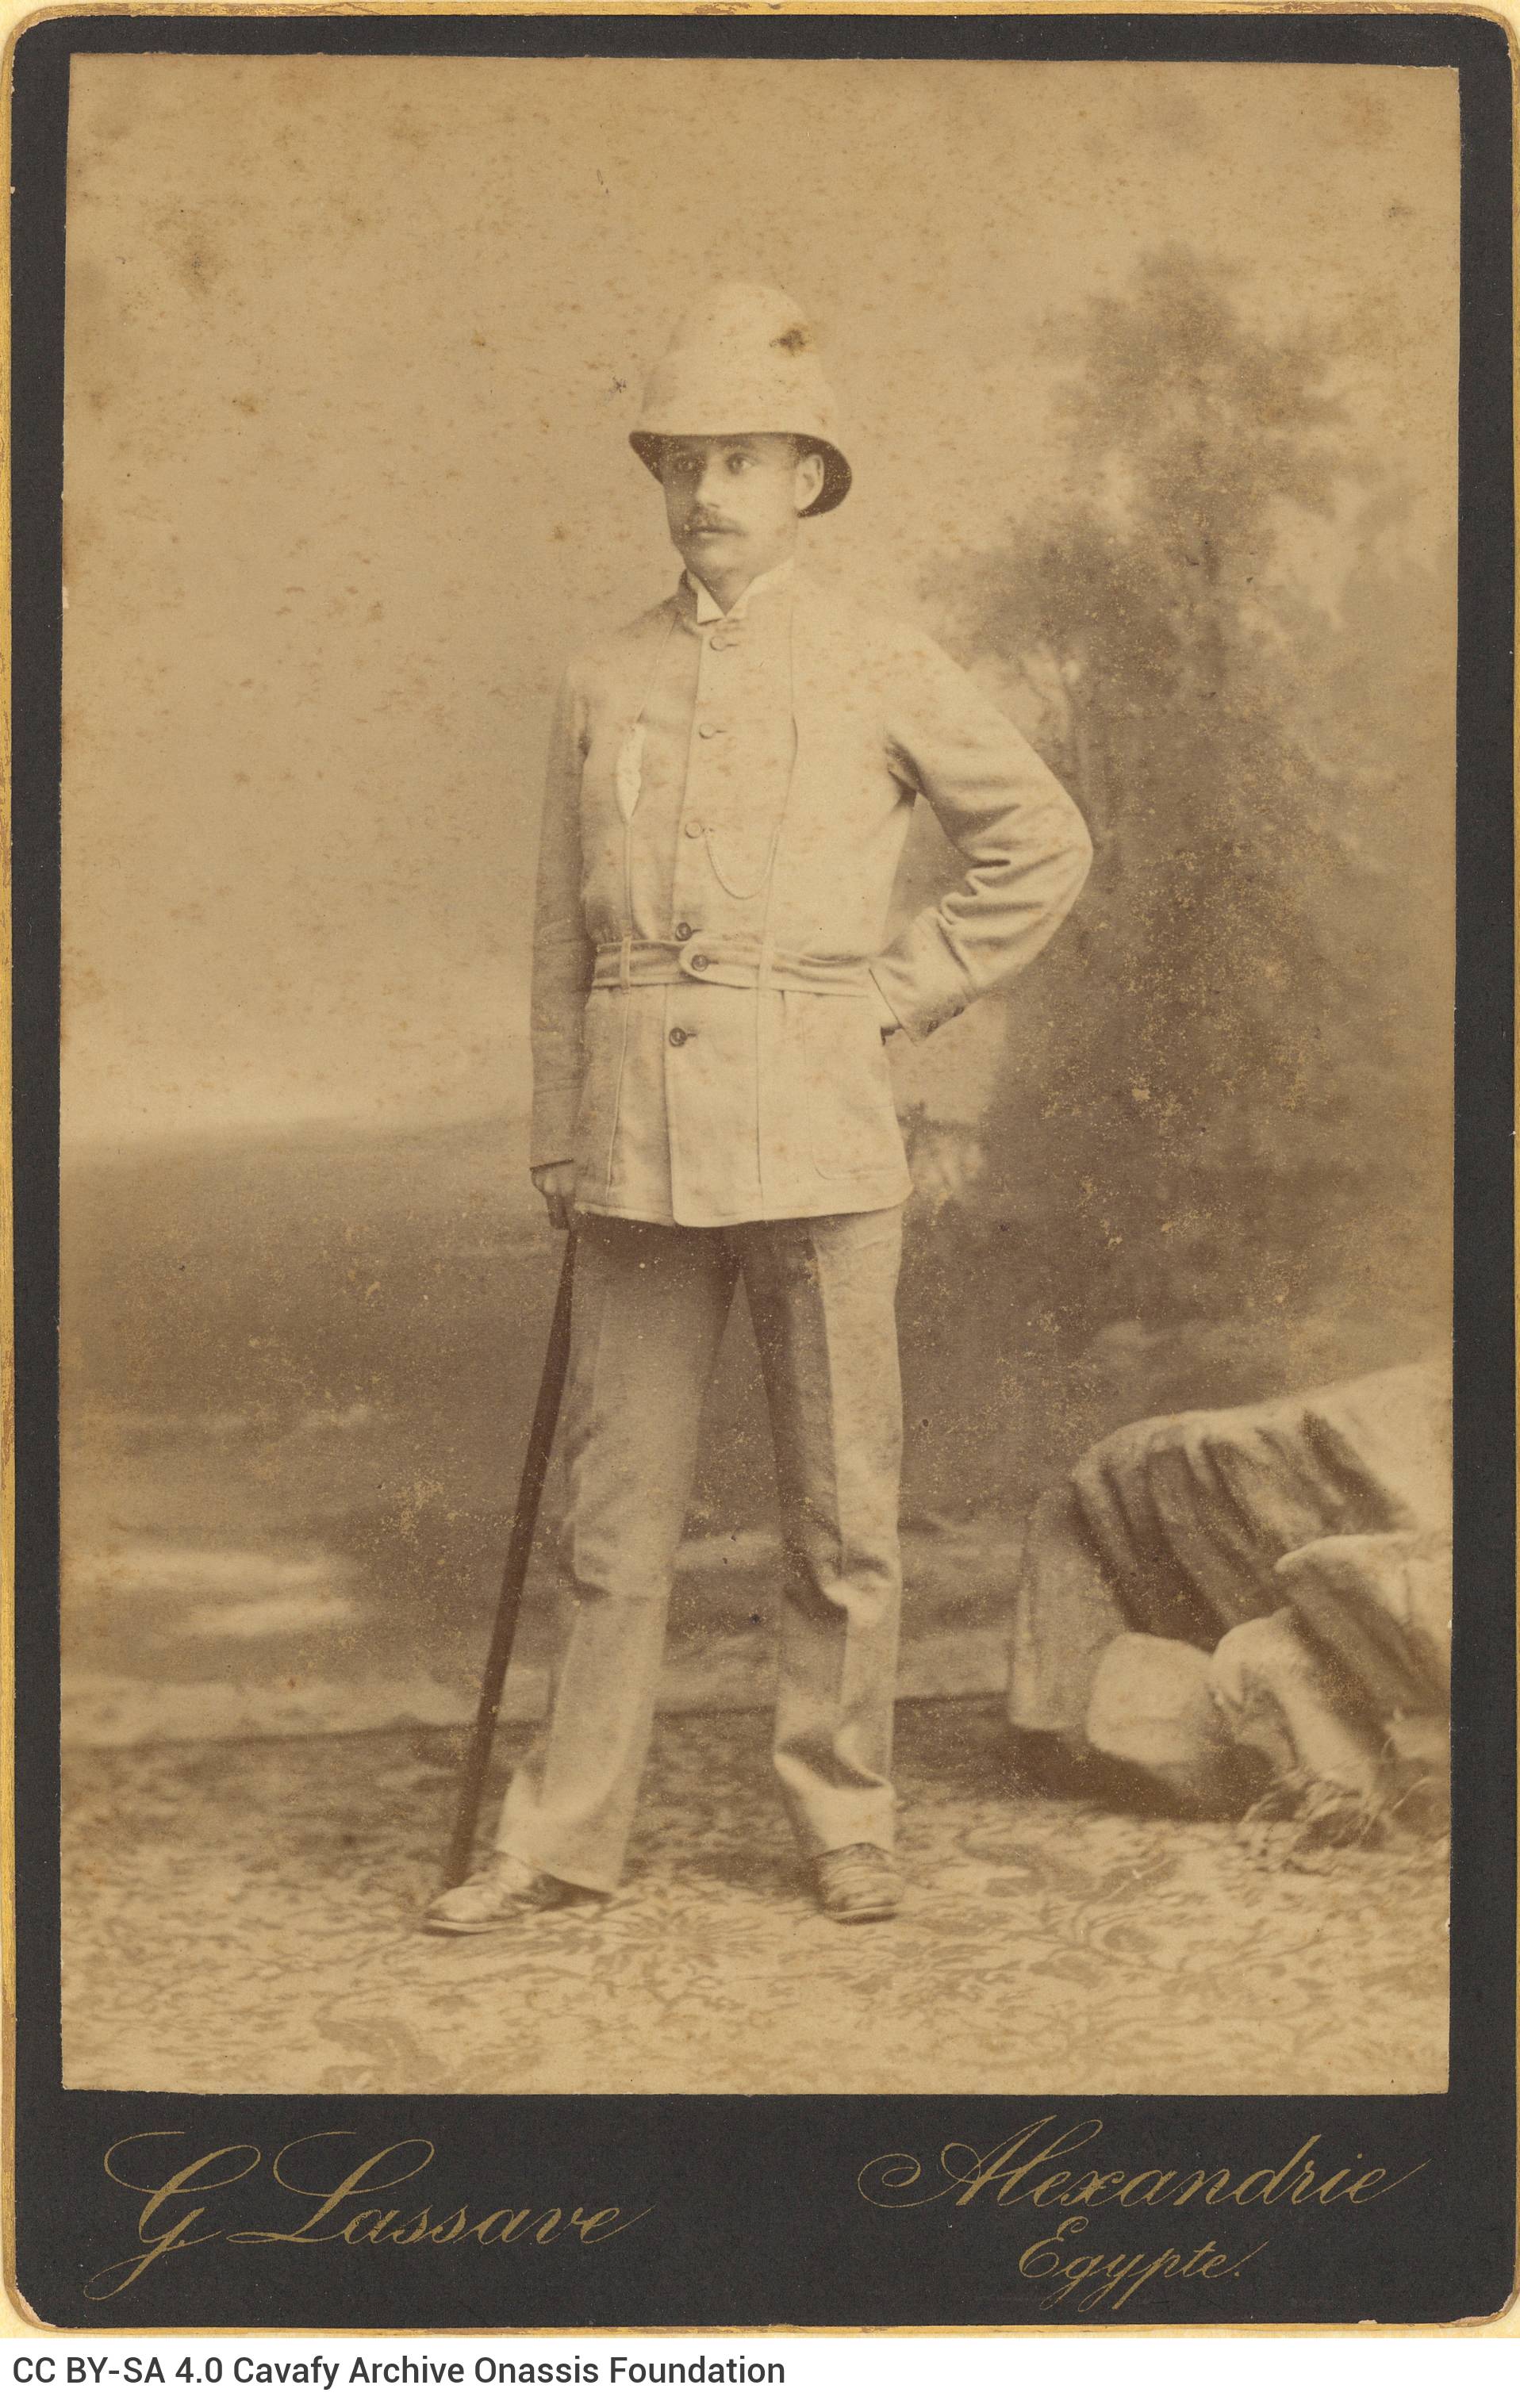 Photograph of a standing man in colonial apparel and a colonial hat. He is holding a cane in his right hand. The logo of the 